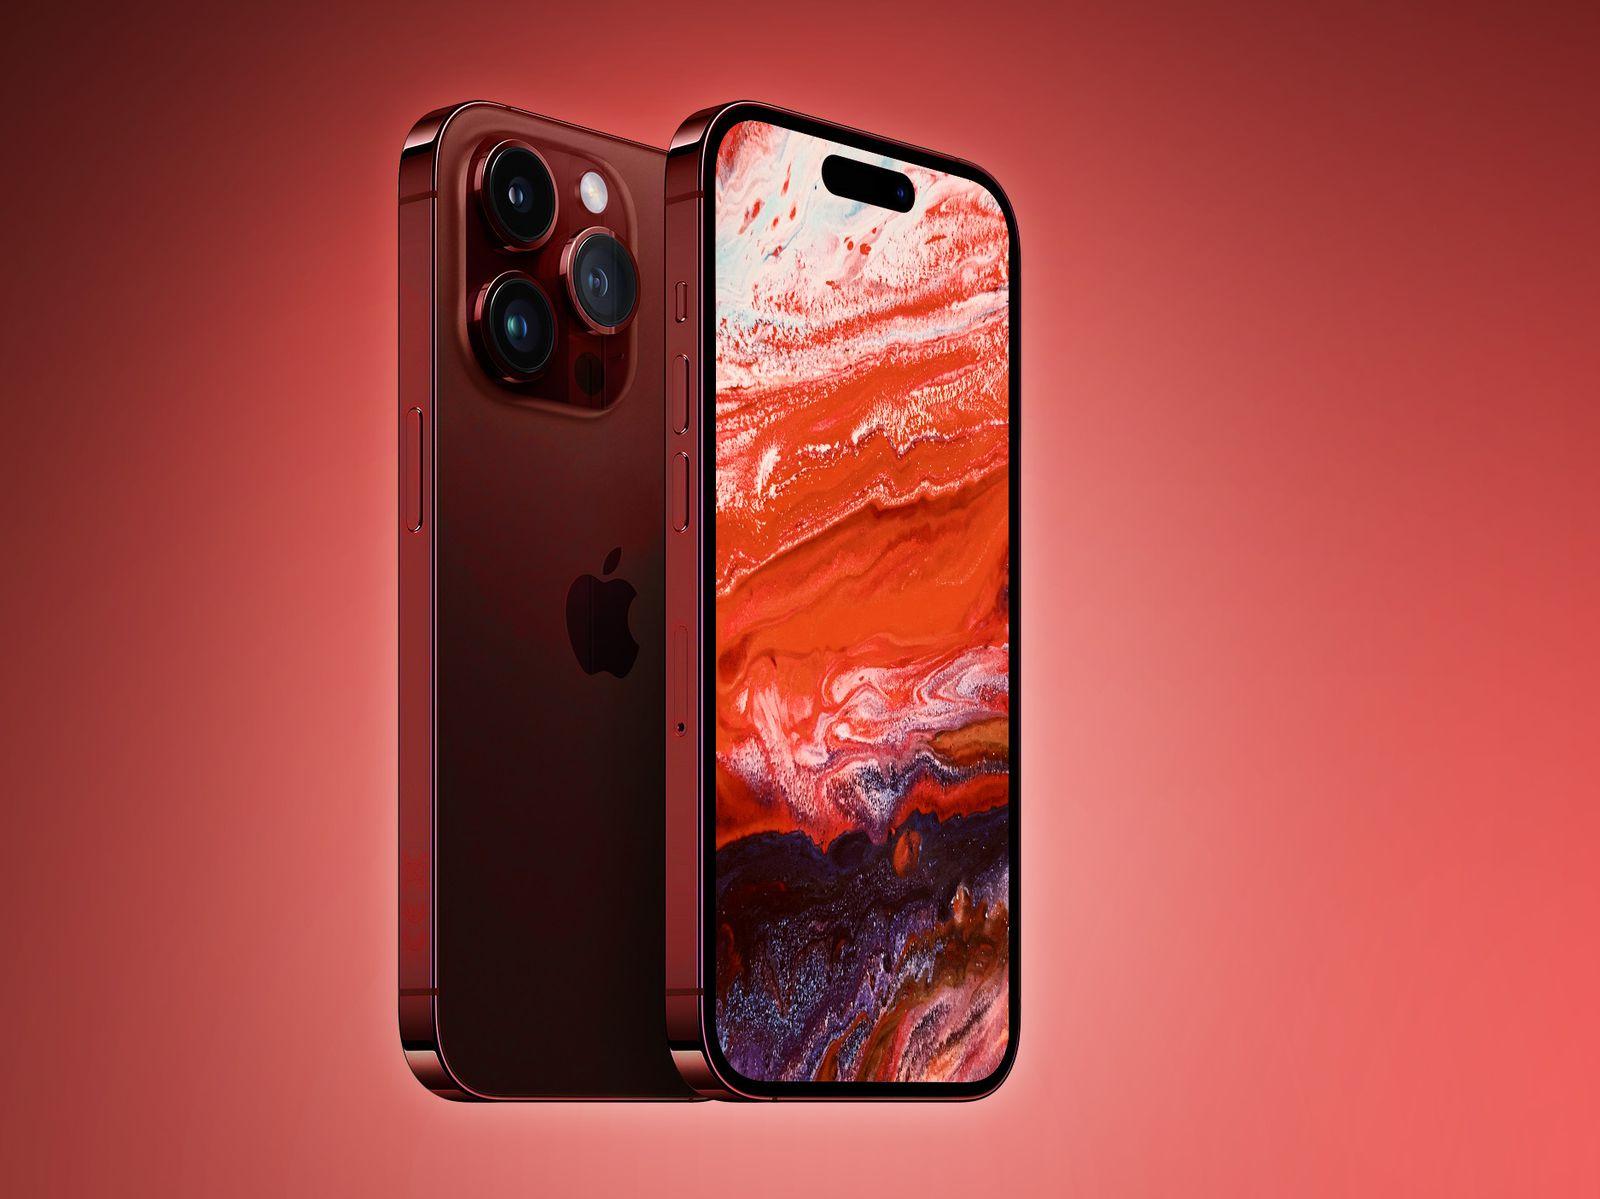 iPhone Pro Could E In Dark Red With Pink And Light Blue